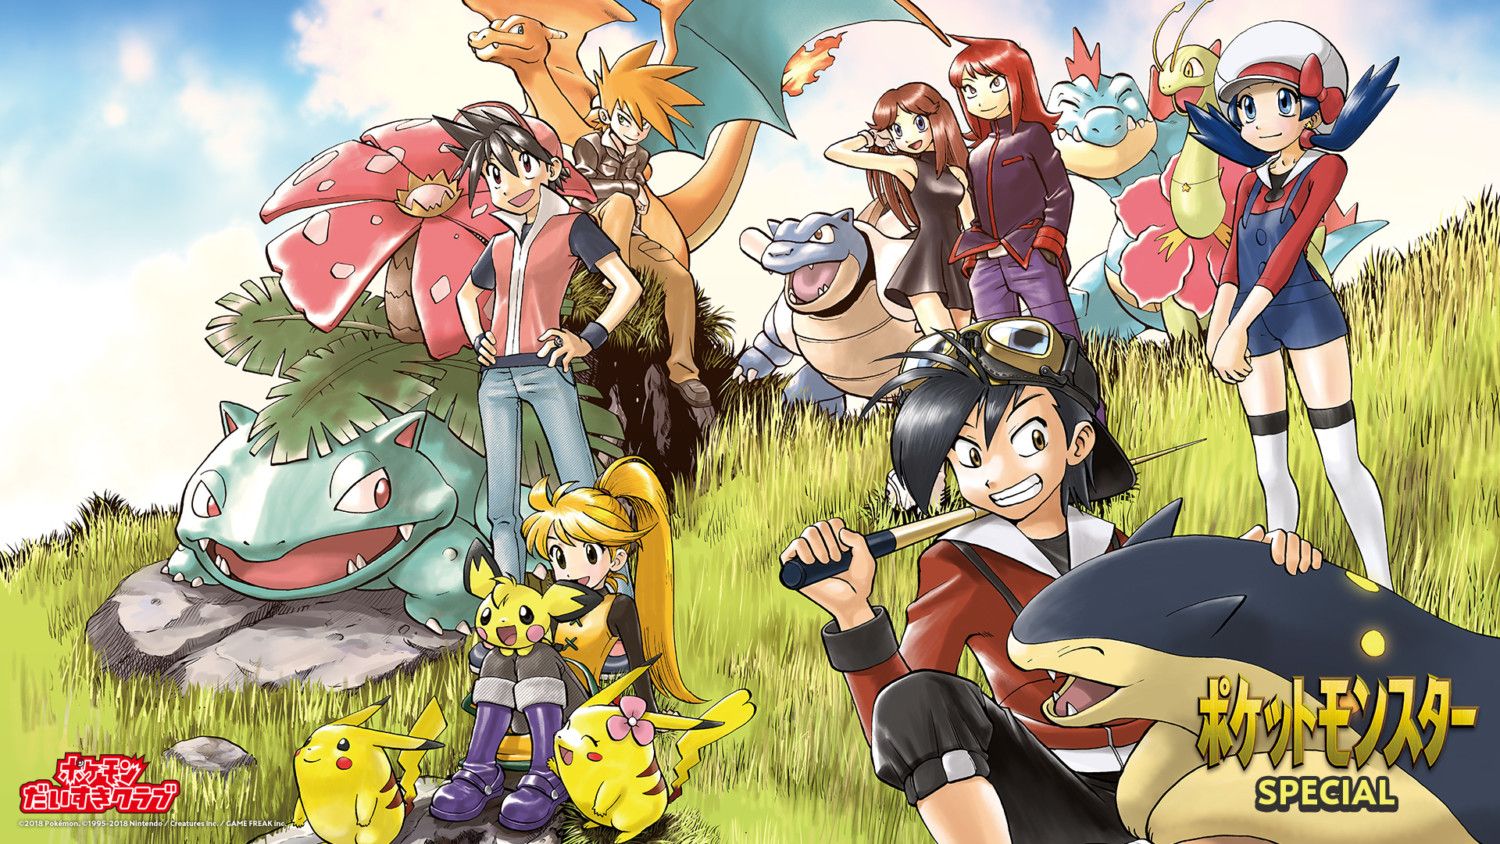 Pokemon Manga Releases Special PC & Mobile Background For Fans